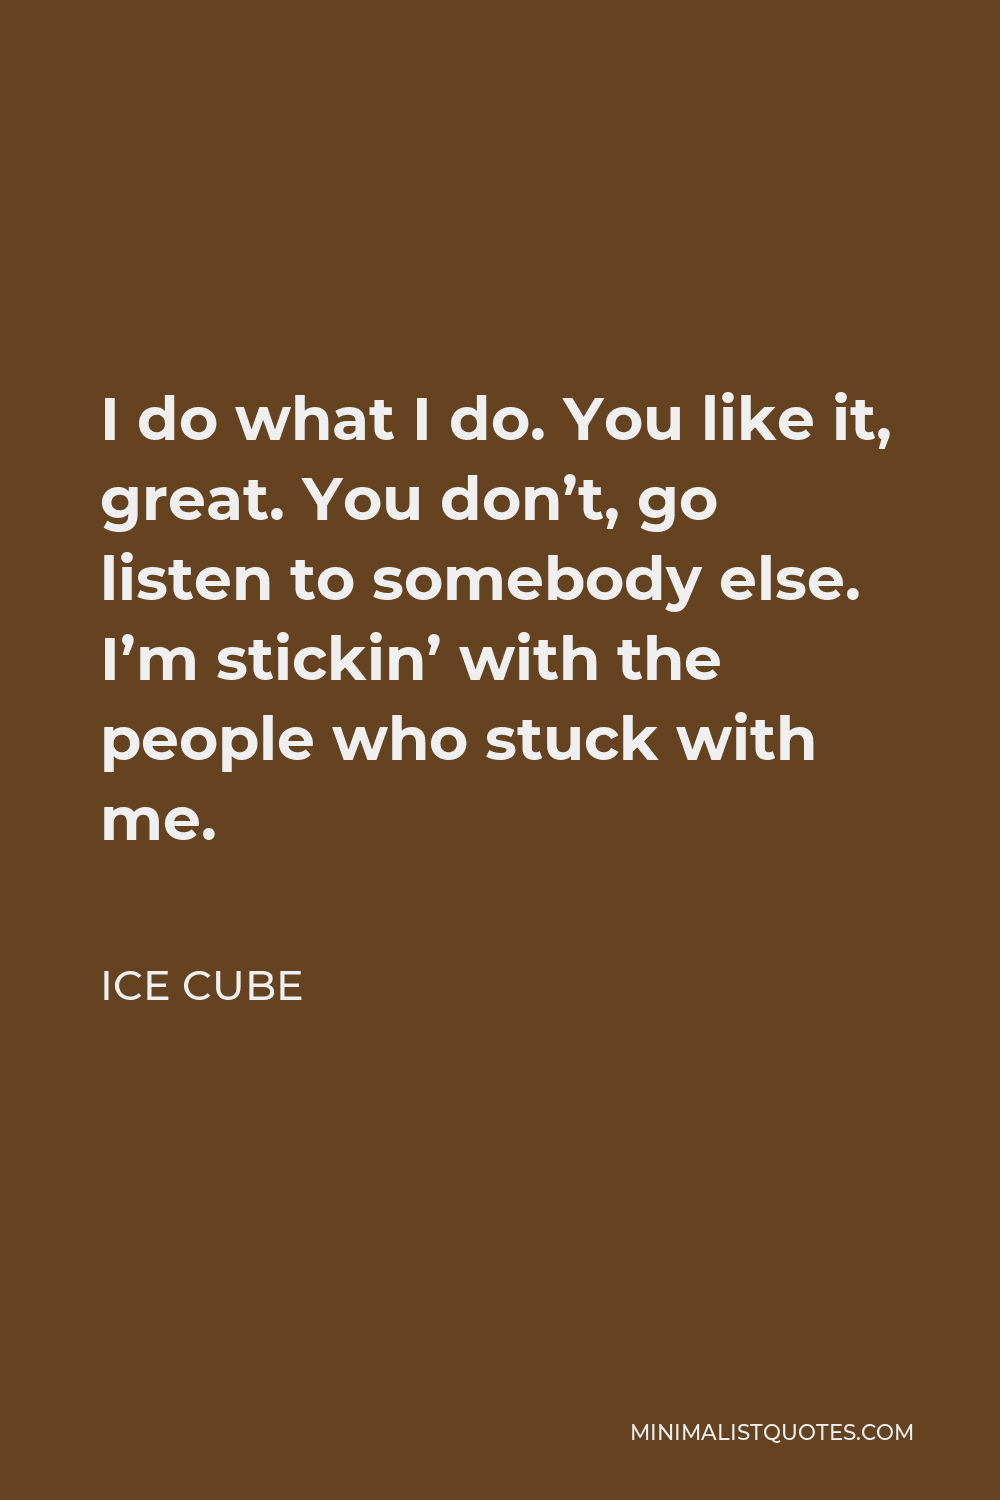 Ice Cube Quote - I do what I do. You like it, great. You don’t, go listen to somebody else. I’m stickin’ with the people who stuck with me.